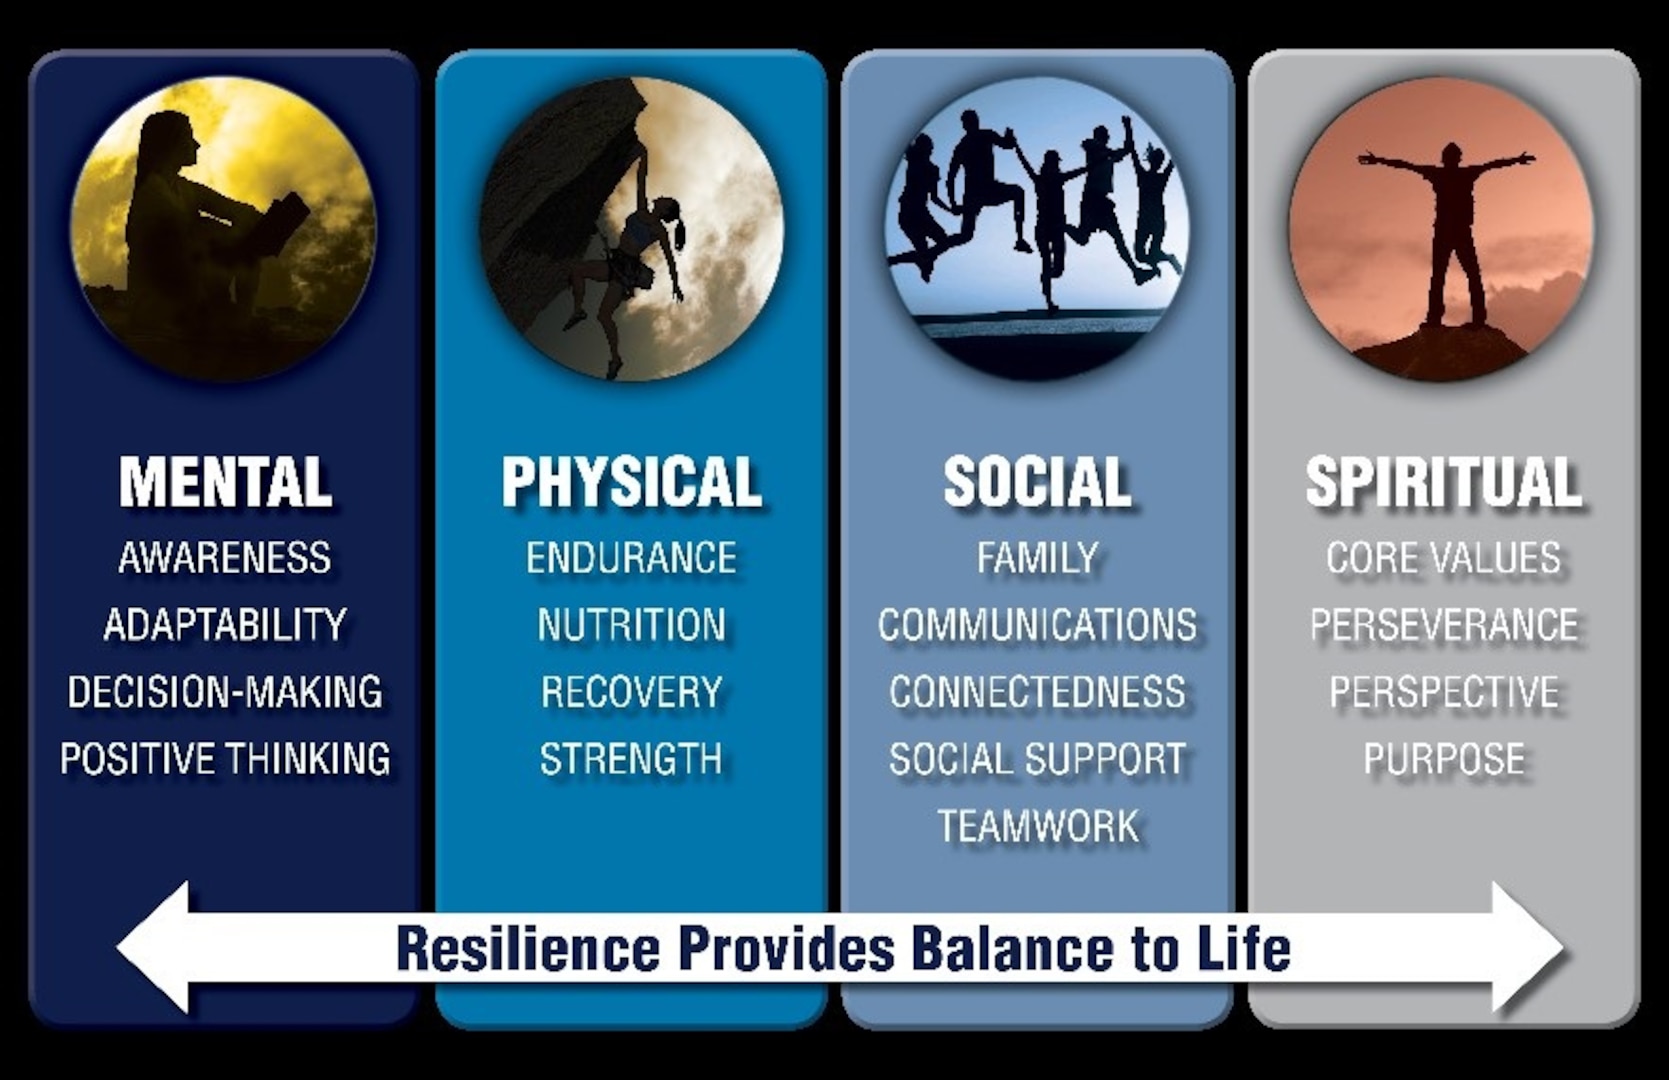 Resilience is defined as how one “deals effectively with pressure, ambiguous and emerging conditions, and multiple tasks; remains optimistic and persistent, even under adversity or uncertainty. Recovers quickly from setbacks. Anticipates changes and learns from mistakes.”